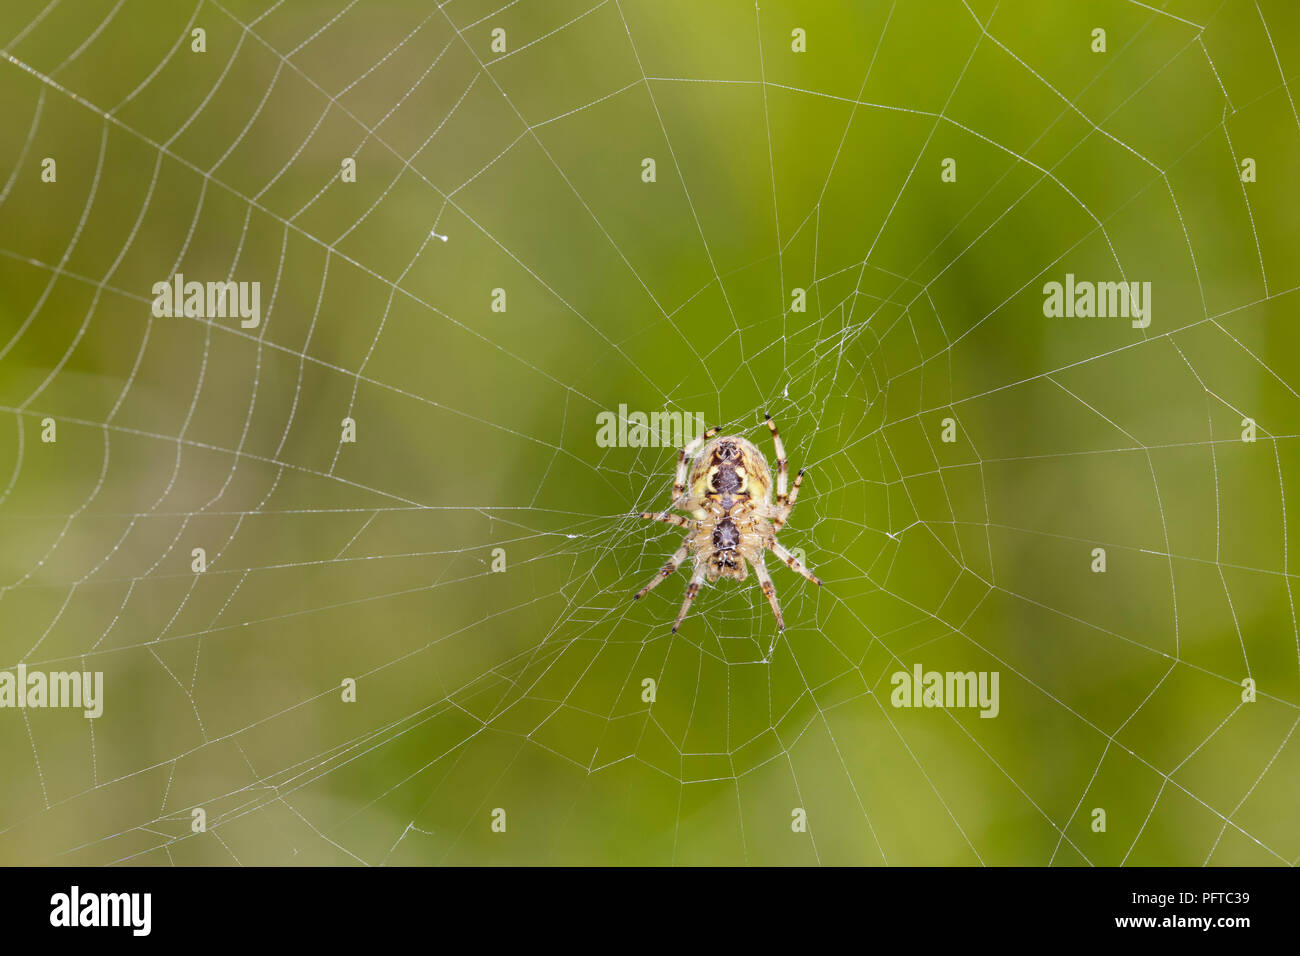 small spider on the net, green background Stock Photo